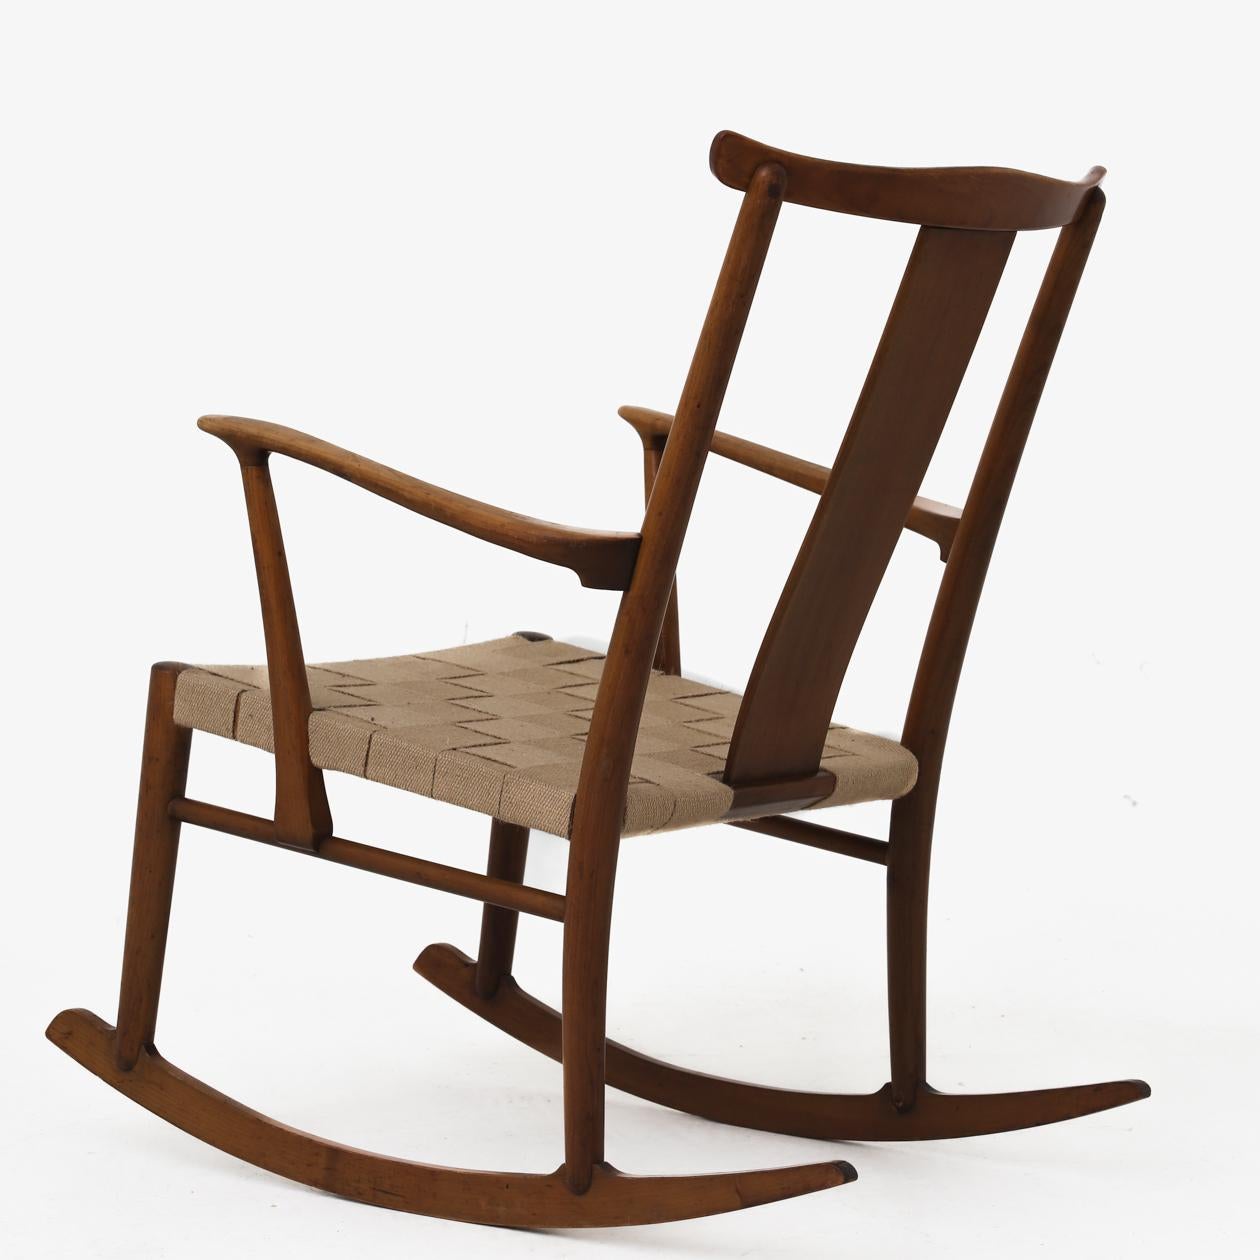 Model 1773 - Rocking chair in stained beech and seat in new natural wood. Designed in 1942. Axel O. Larsen / Fritz Hansen.